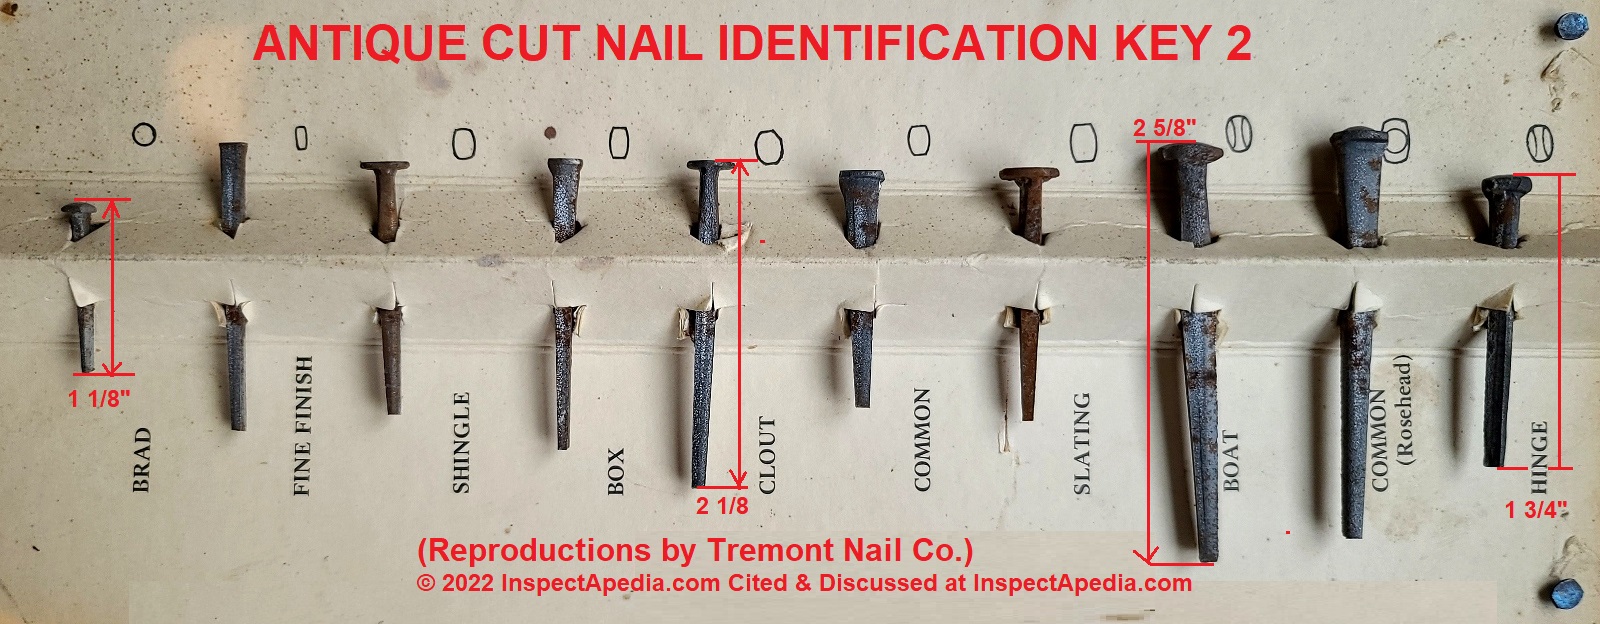 Tremont Cut Nails 3" Hot-Dipped Galvanized Fire Door Clinch Nails One Pound 